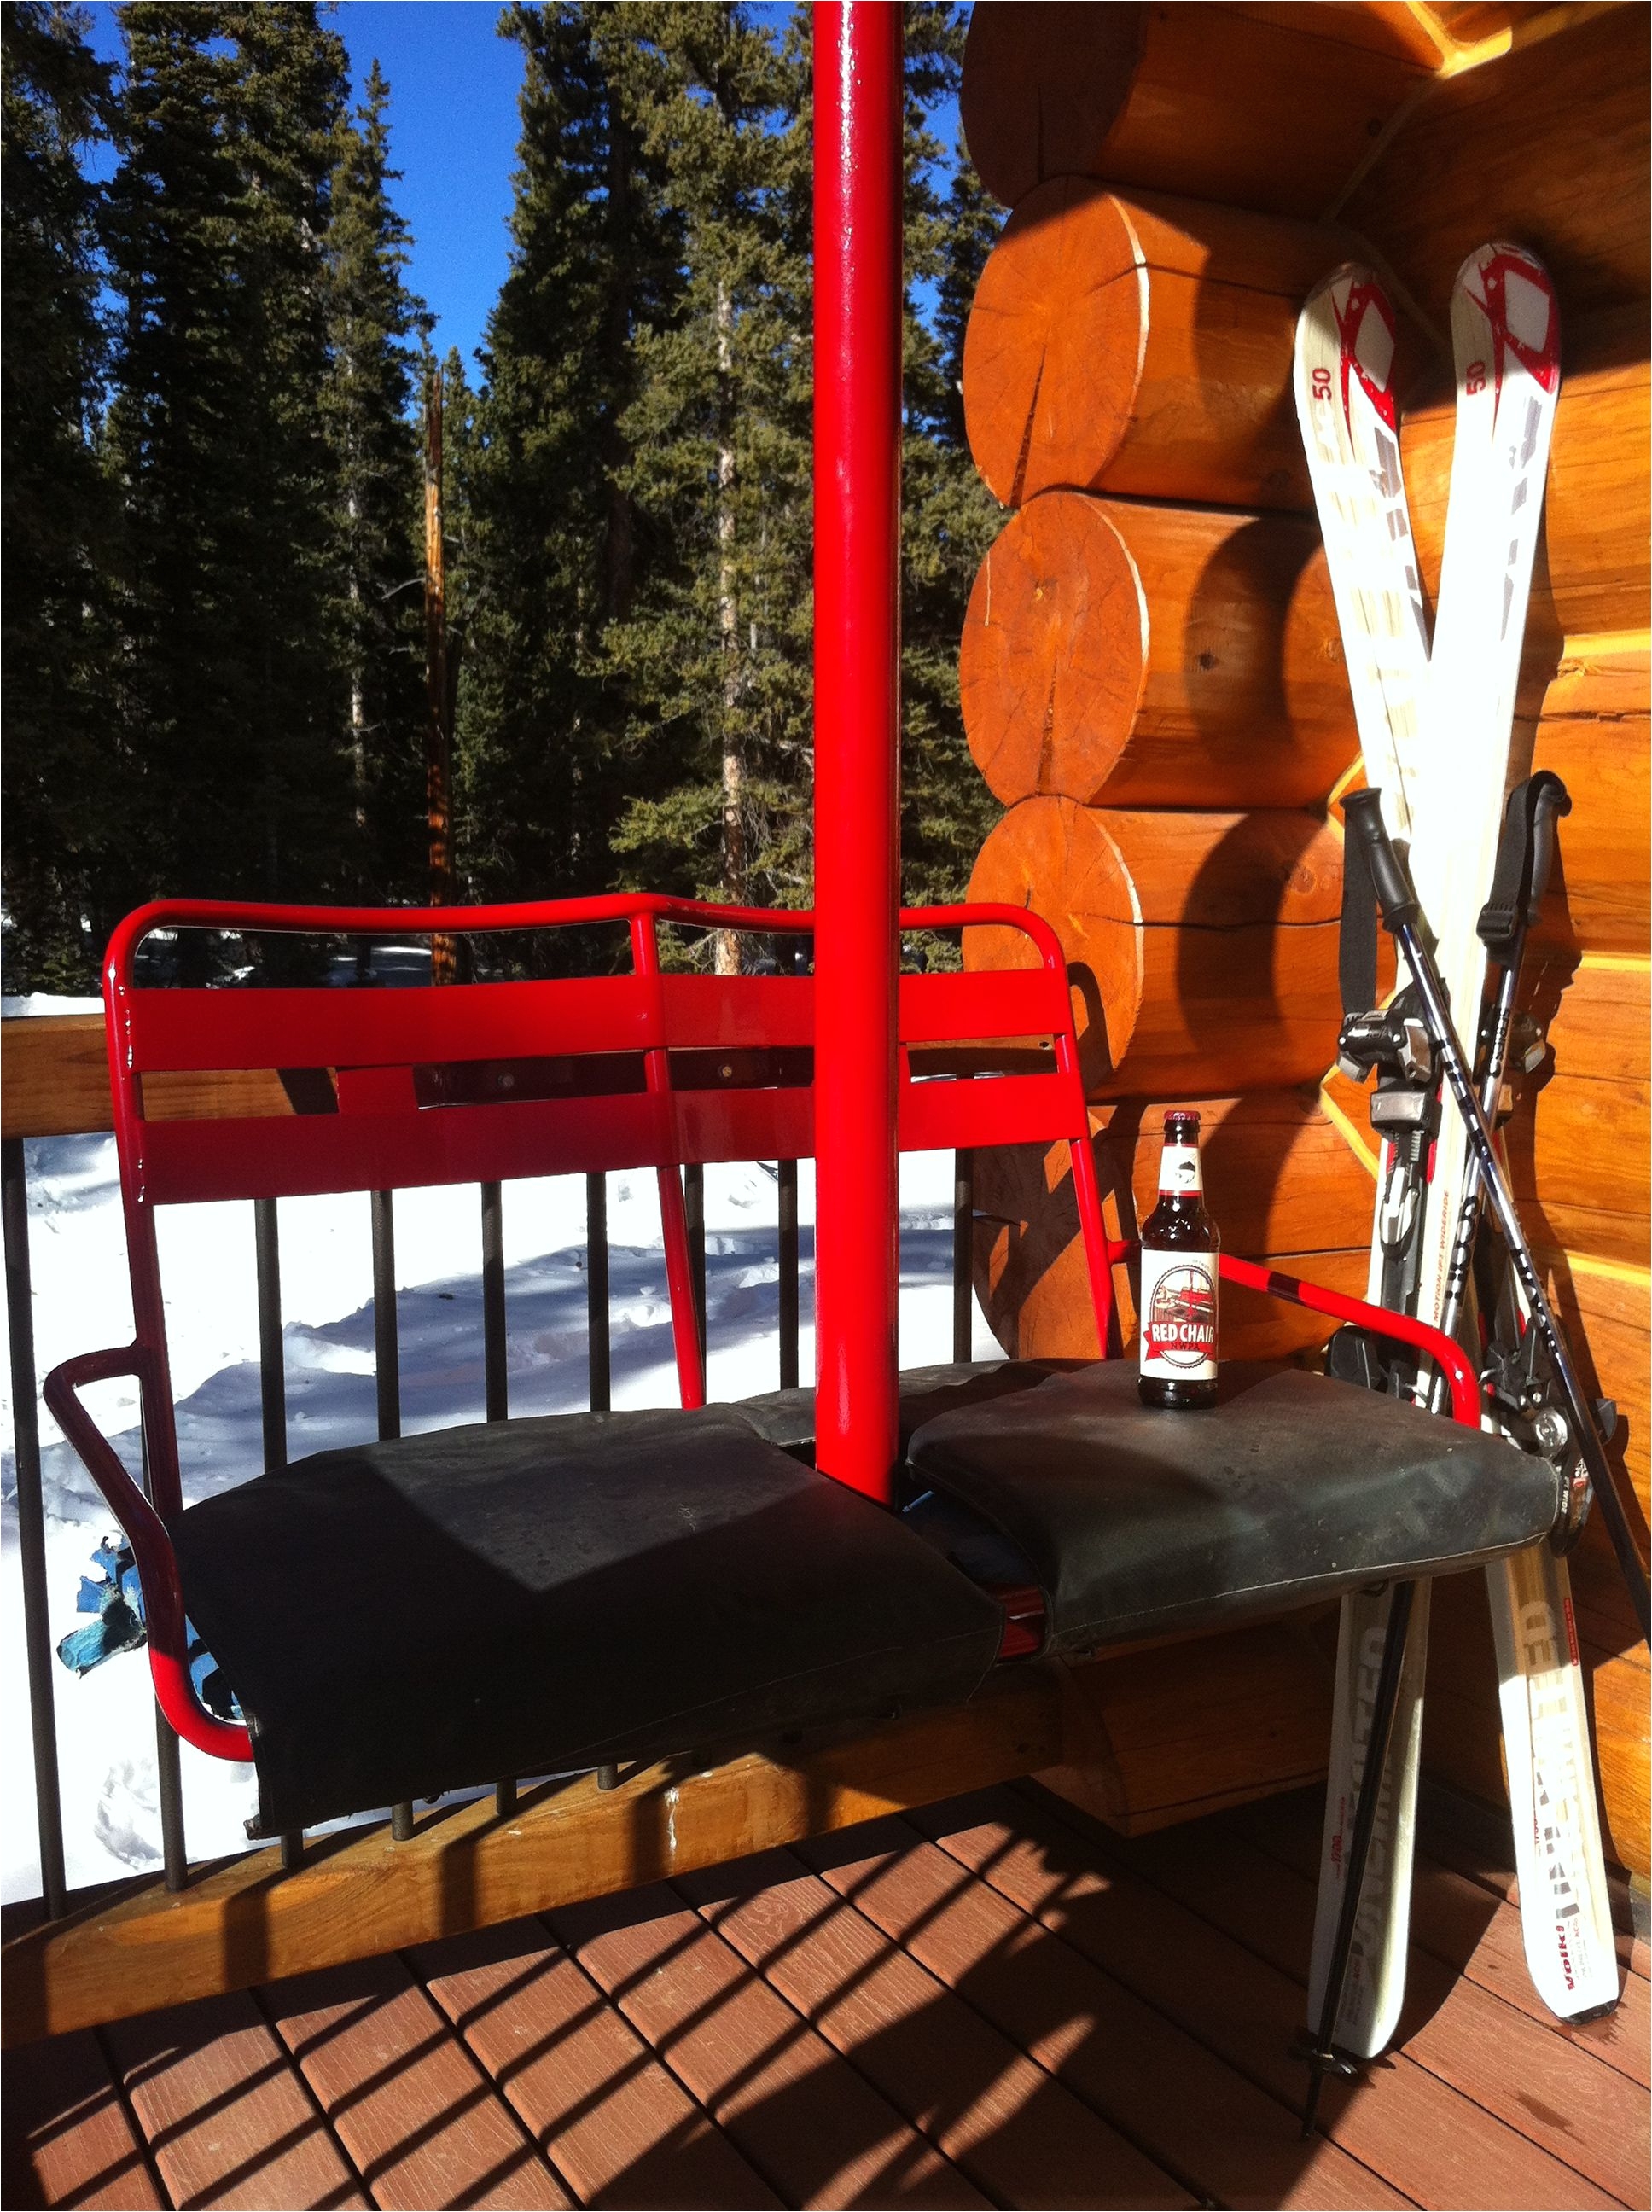 Ski Lift Chair for Sale Craigslist Neat Ideas Use An Old Ski Lift Chair as A Front Porch Bench